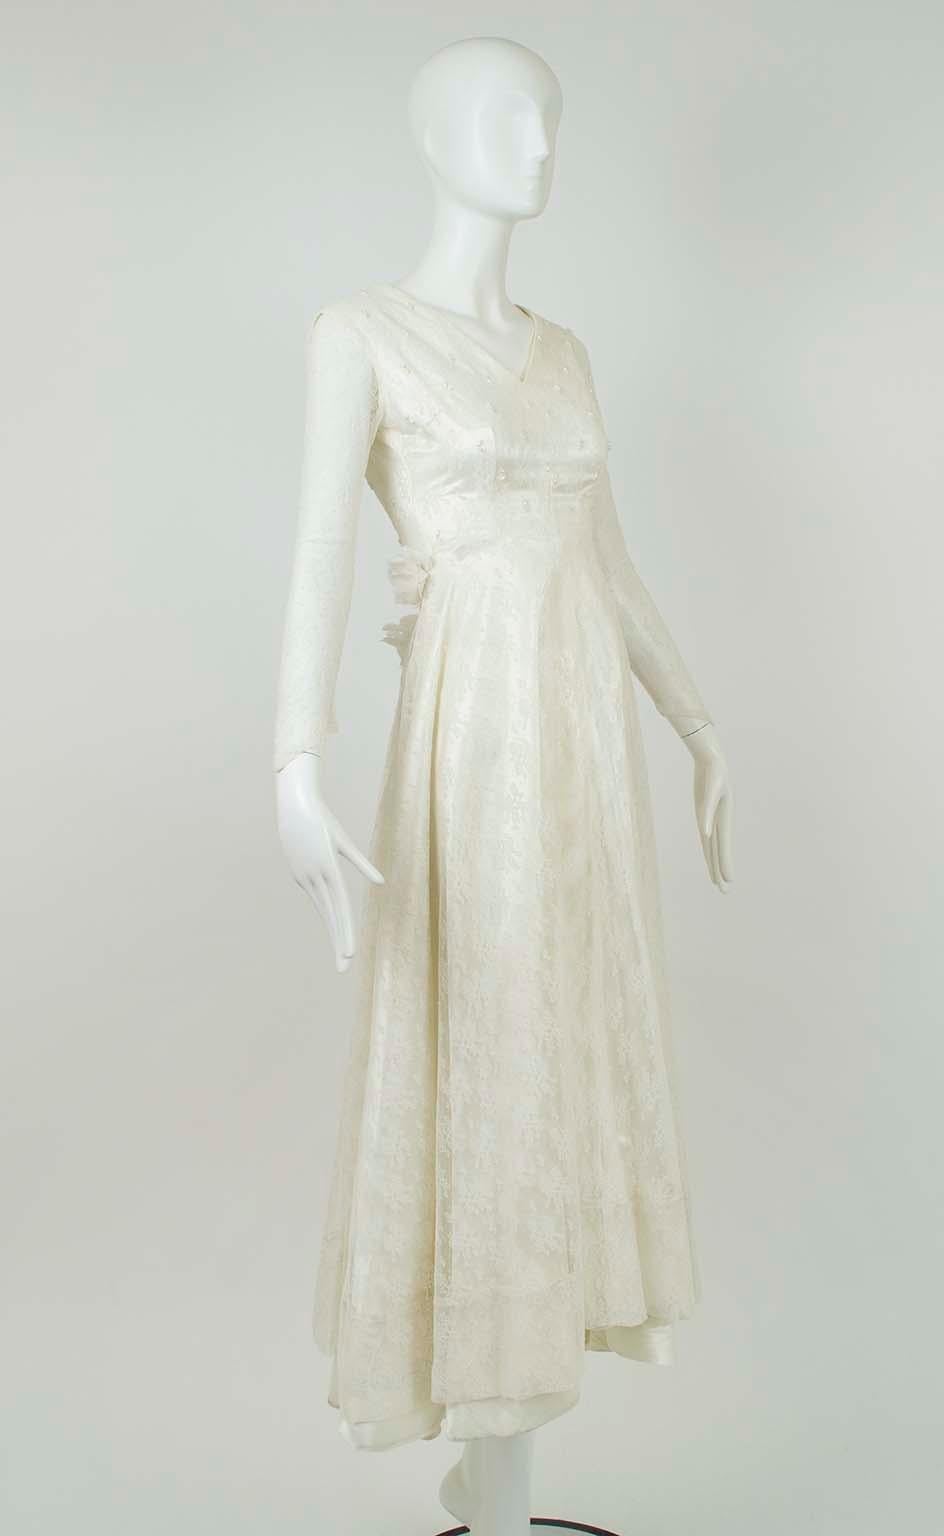 With Taylor’s neck and waistline, Hepburn’s sleeves and Kelly’s lace, this wedding gown has all the requisites of a 1950s heirloom.  We love how the uneven, graduated hemline and derrière-flattering roses cast a modern influence on the otherwise